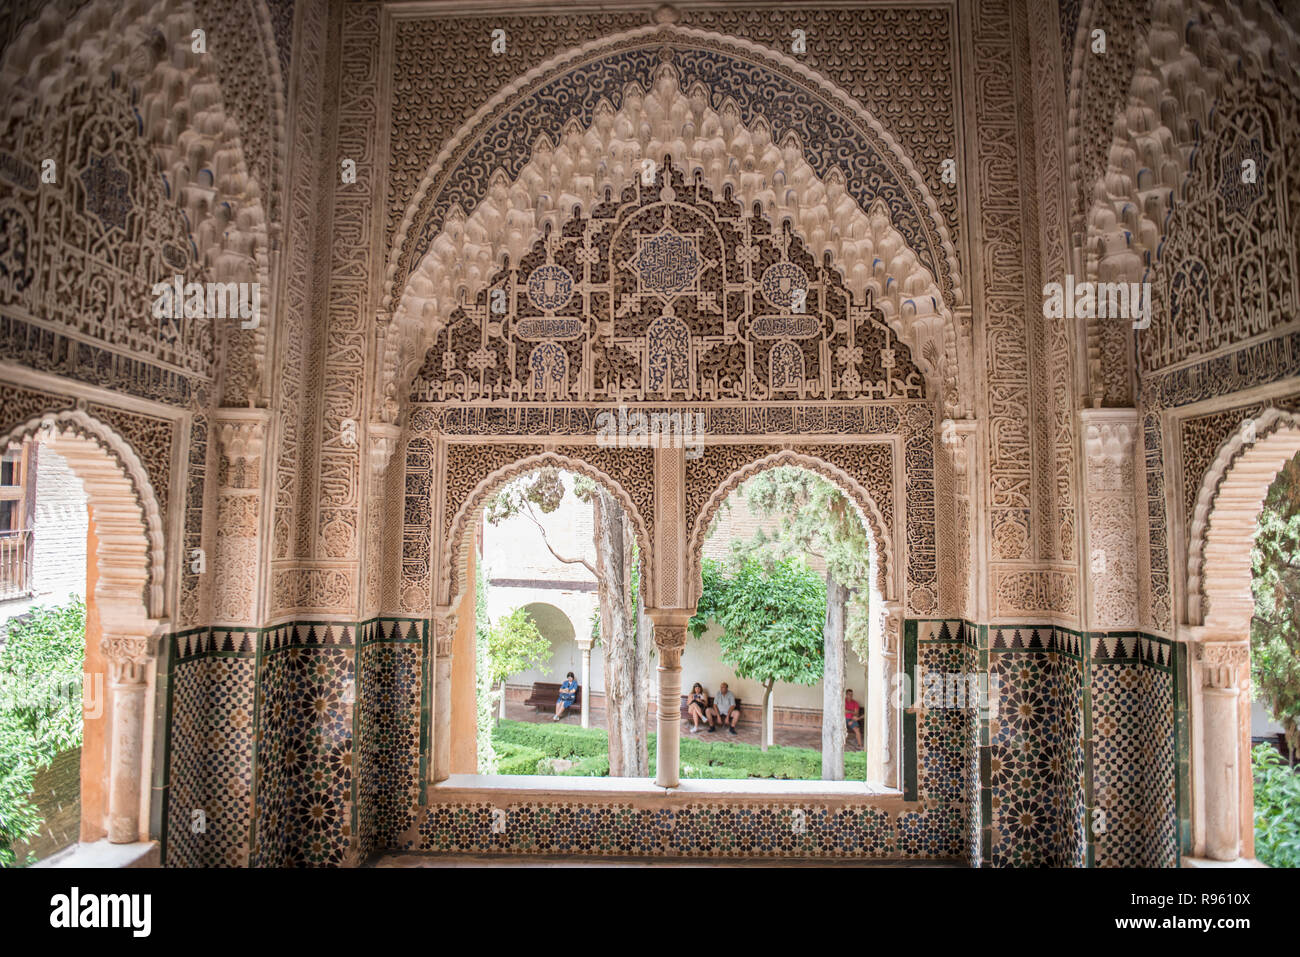 Beautiful architecture of the famous Alcazar of Seville Royal Palace. It is one of the most famous historical palaces in Spain and boasts of the fines Stock Photo